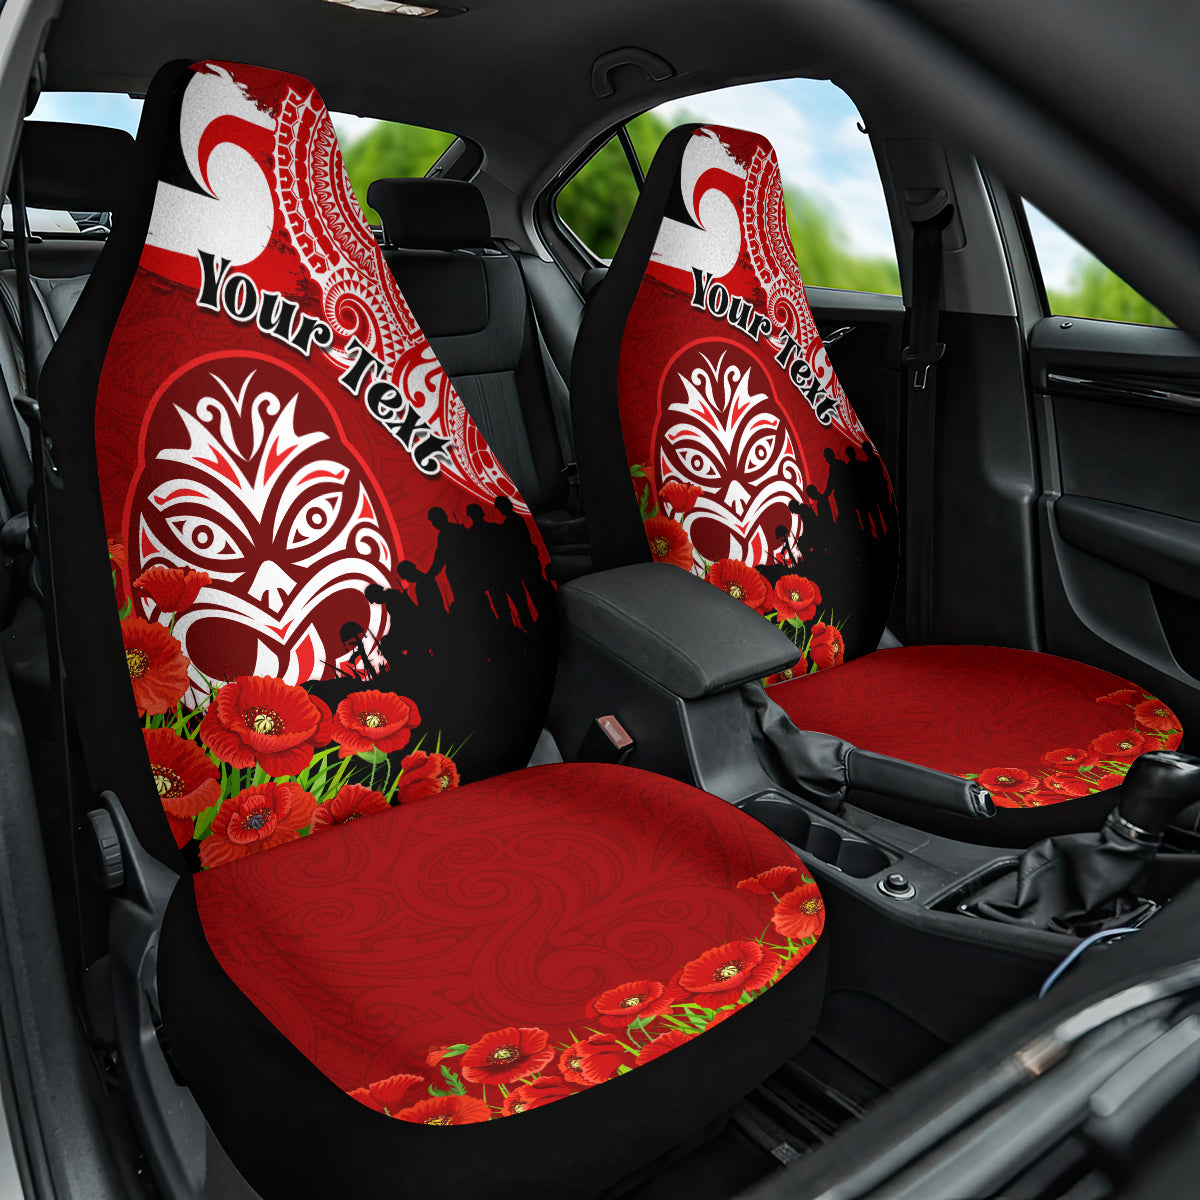 New Zealand ANZAC Waitangi Day Car Seat Cover Lest We Forget Soldier Tiki Maori Style LT03 One Size Red - Polynesian Pride